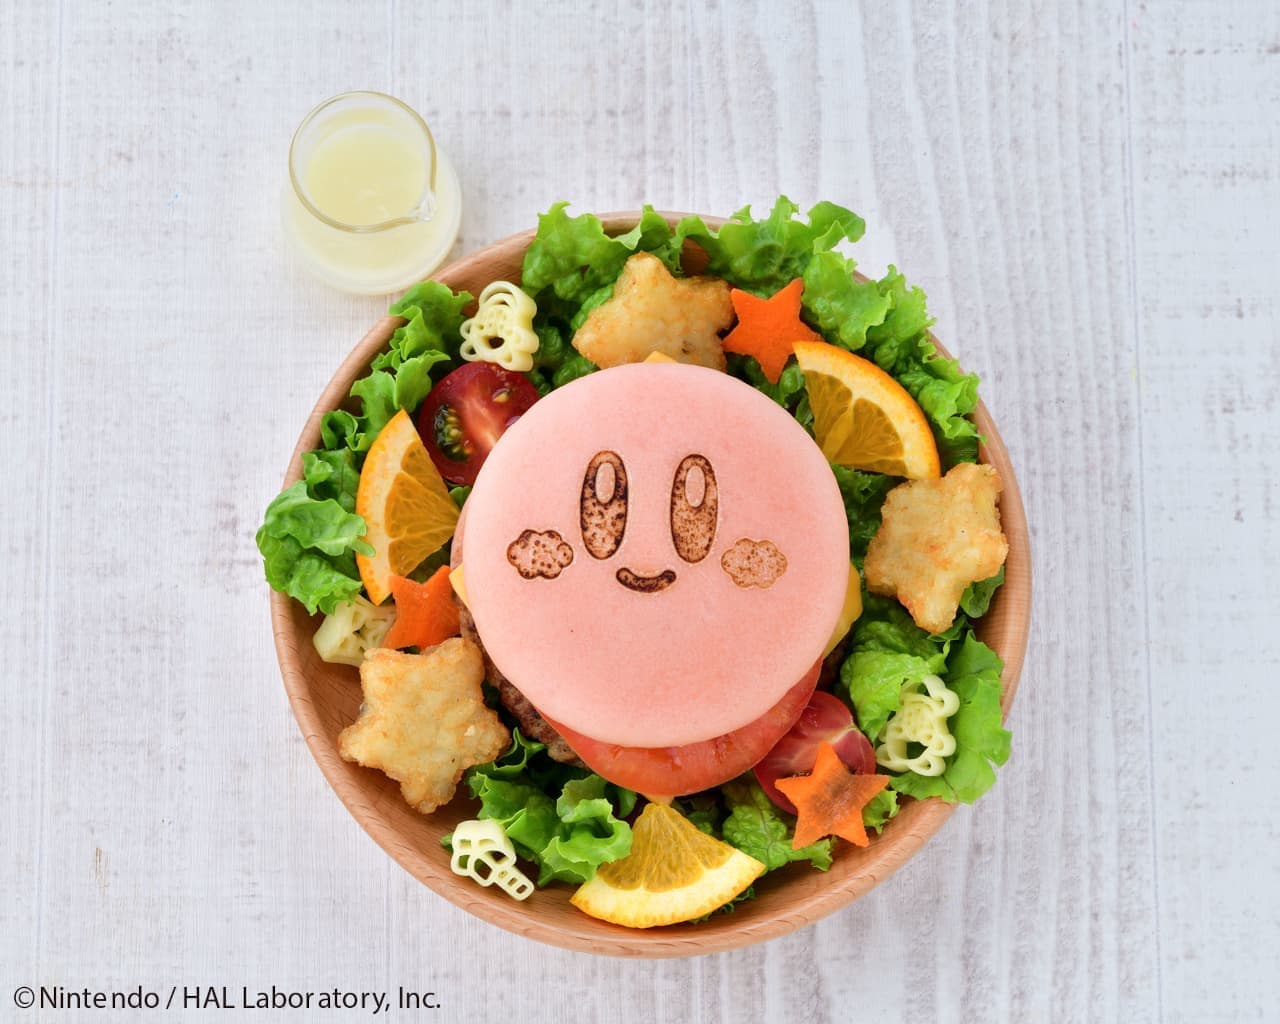 “Kirby Cafe Summer 2021” for a limited time